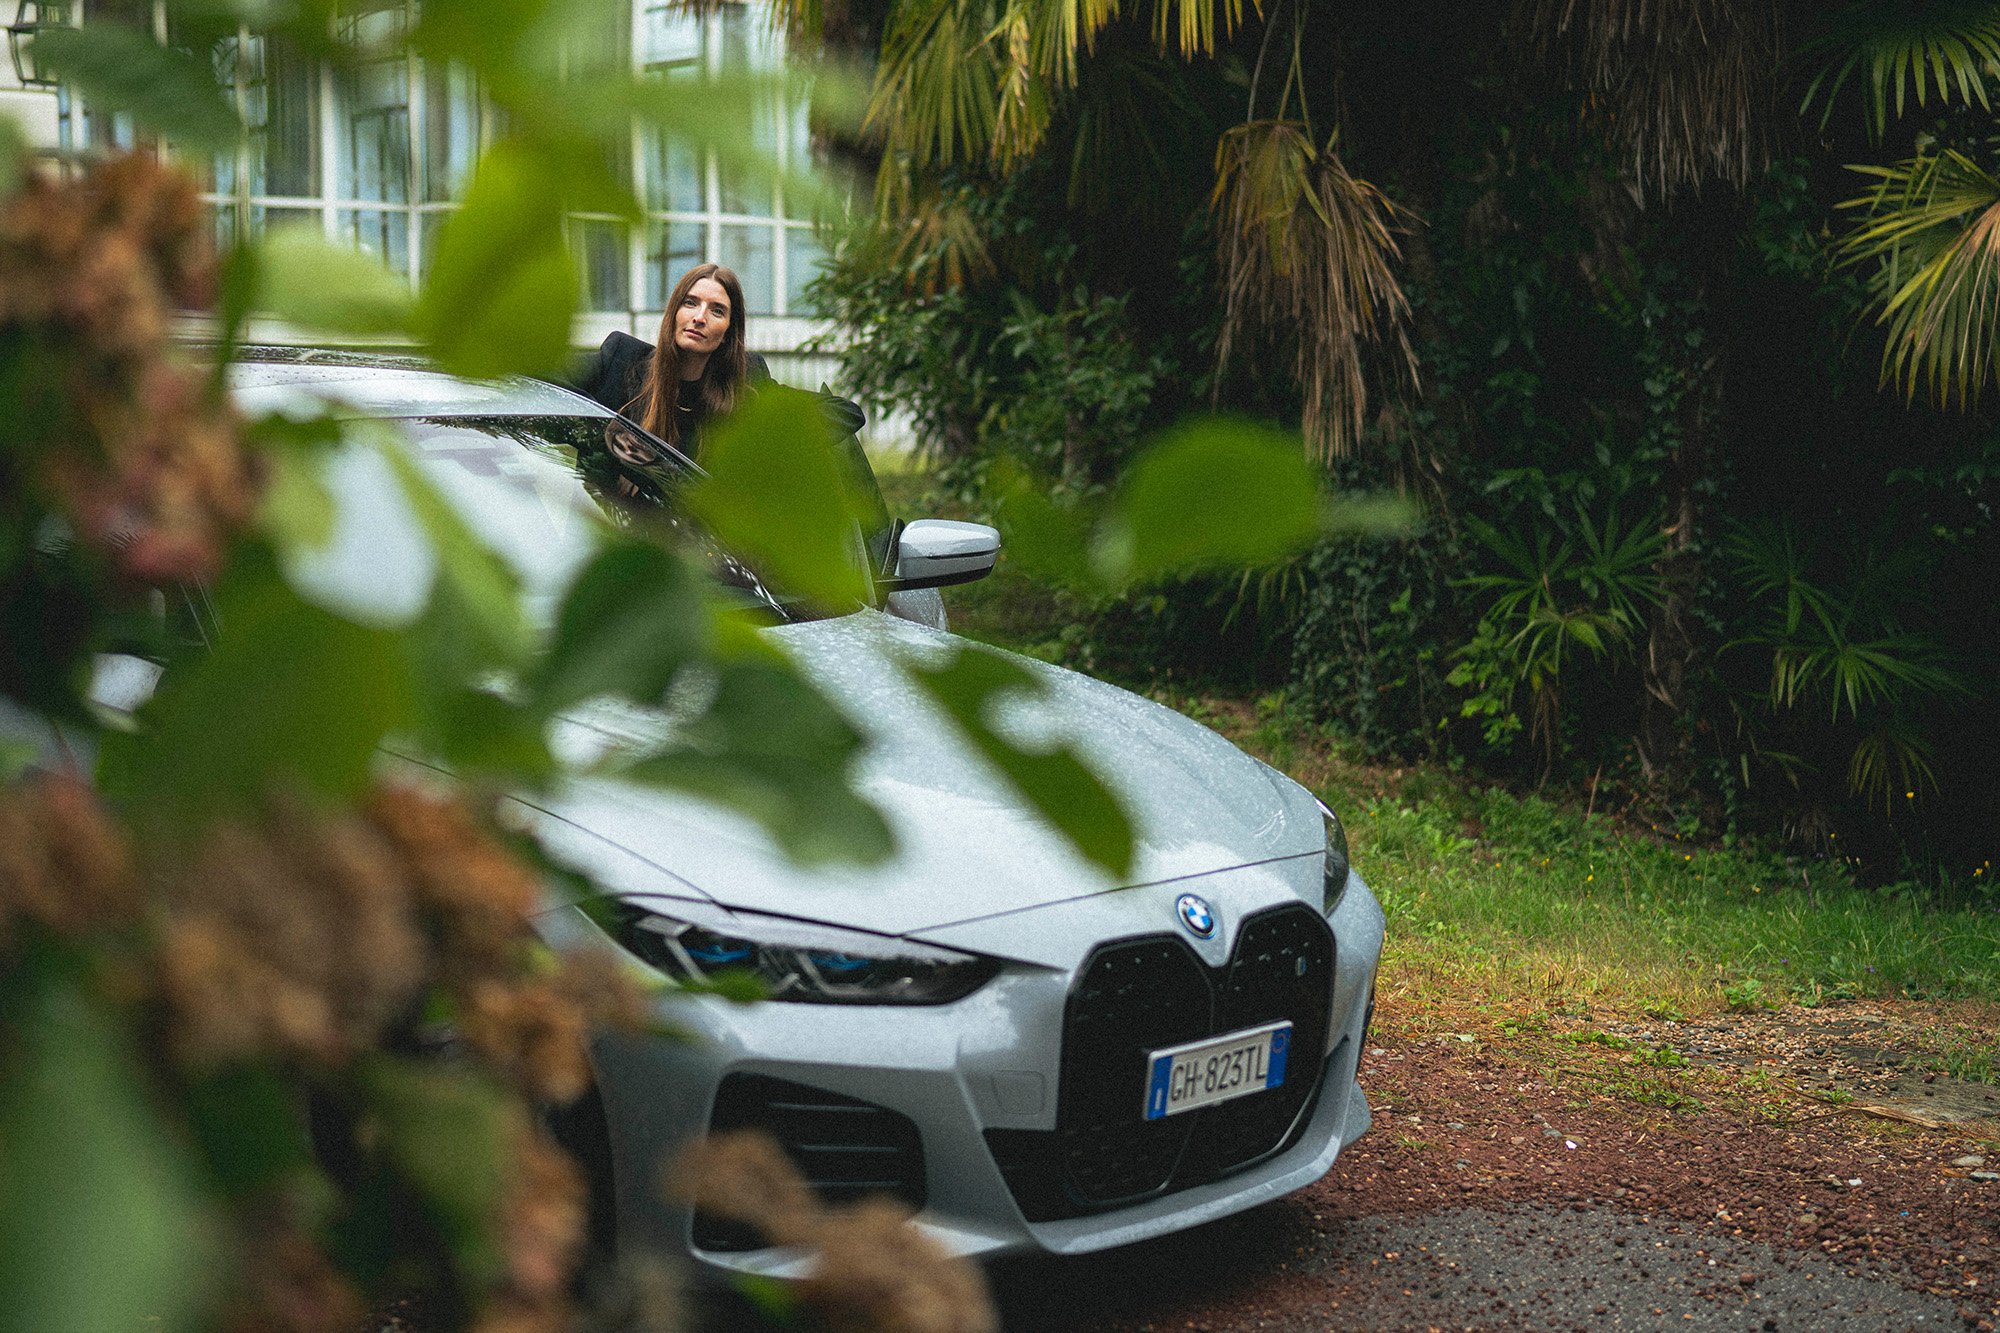 Britta Reineke tests the sound design of Renzo Vitale and Hans Zimmer in the all-electric BMW i4